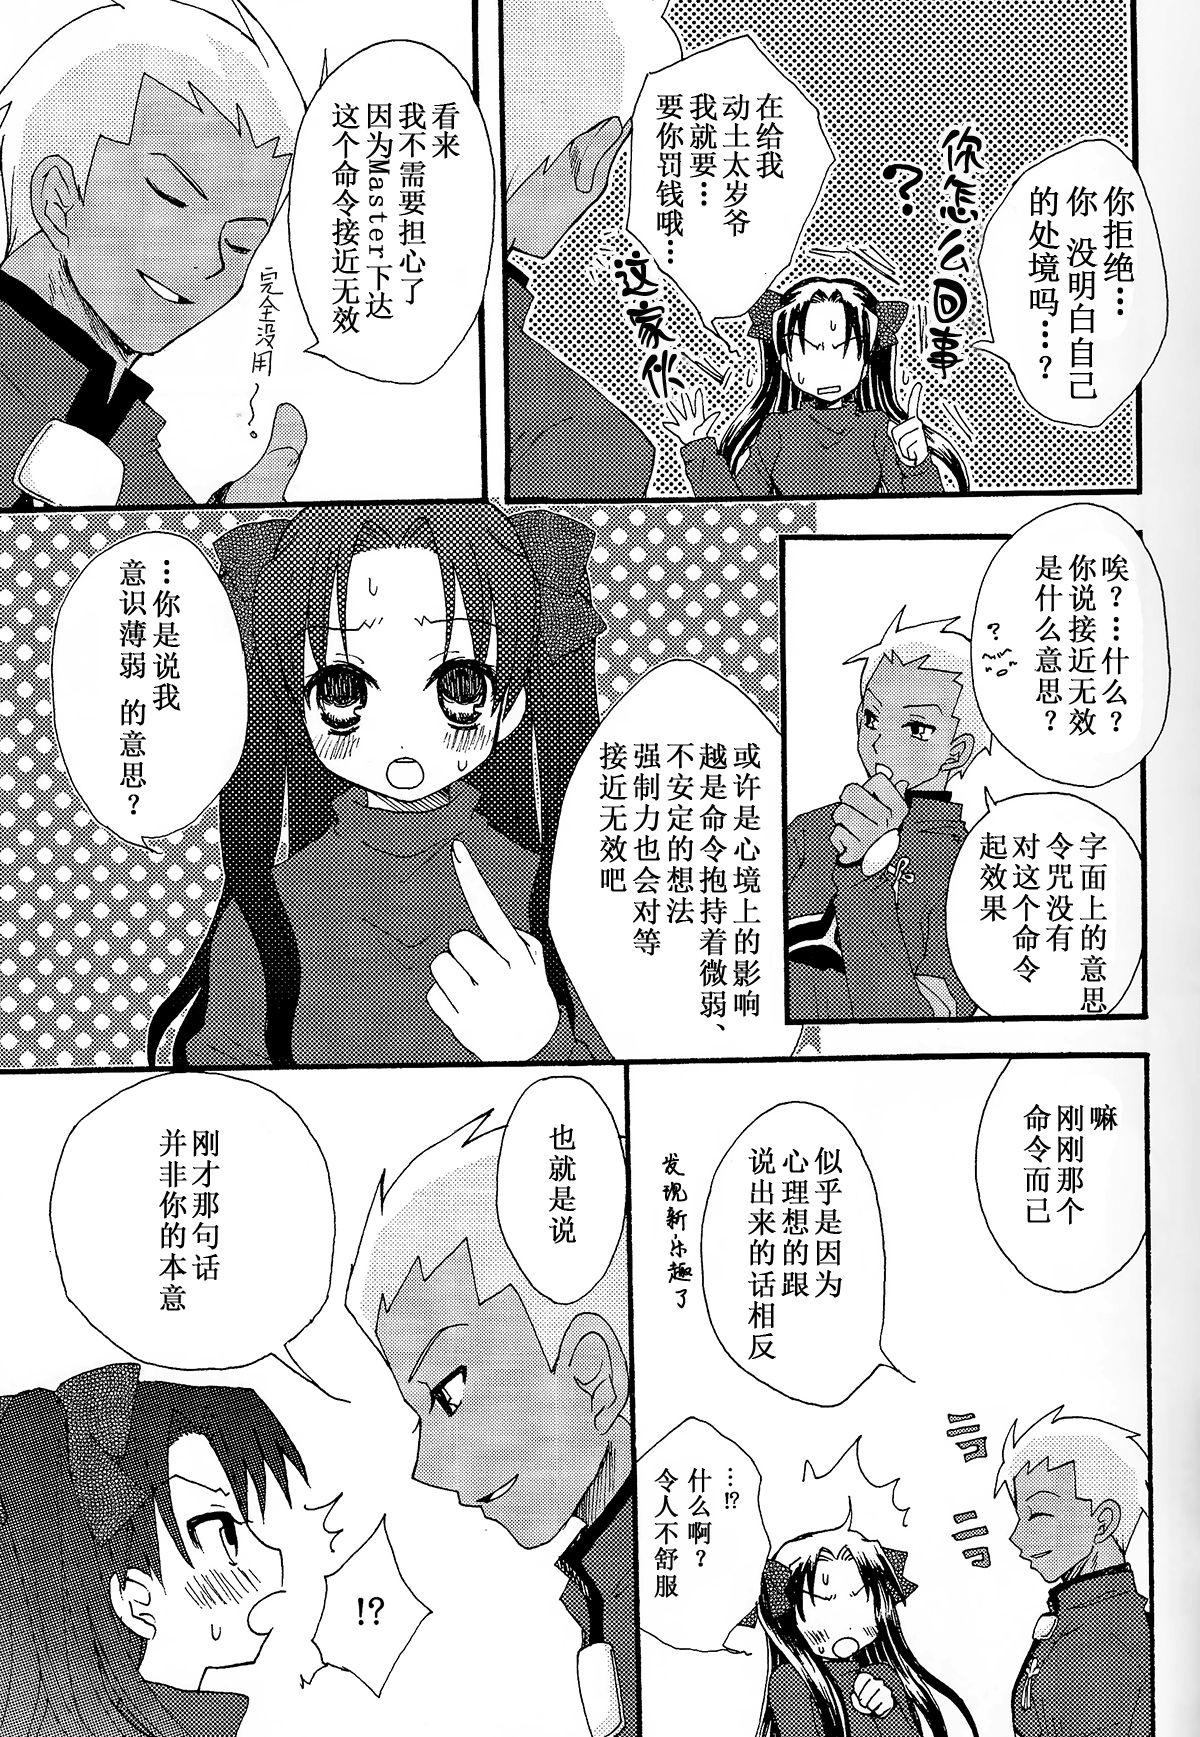 Girl Sucking Dick Kanojo to Aiken - Fate stay night Short - Page 6